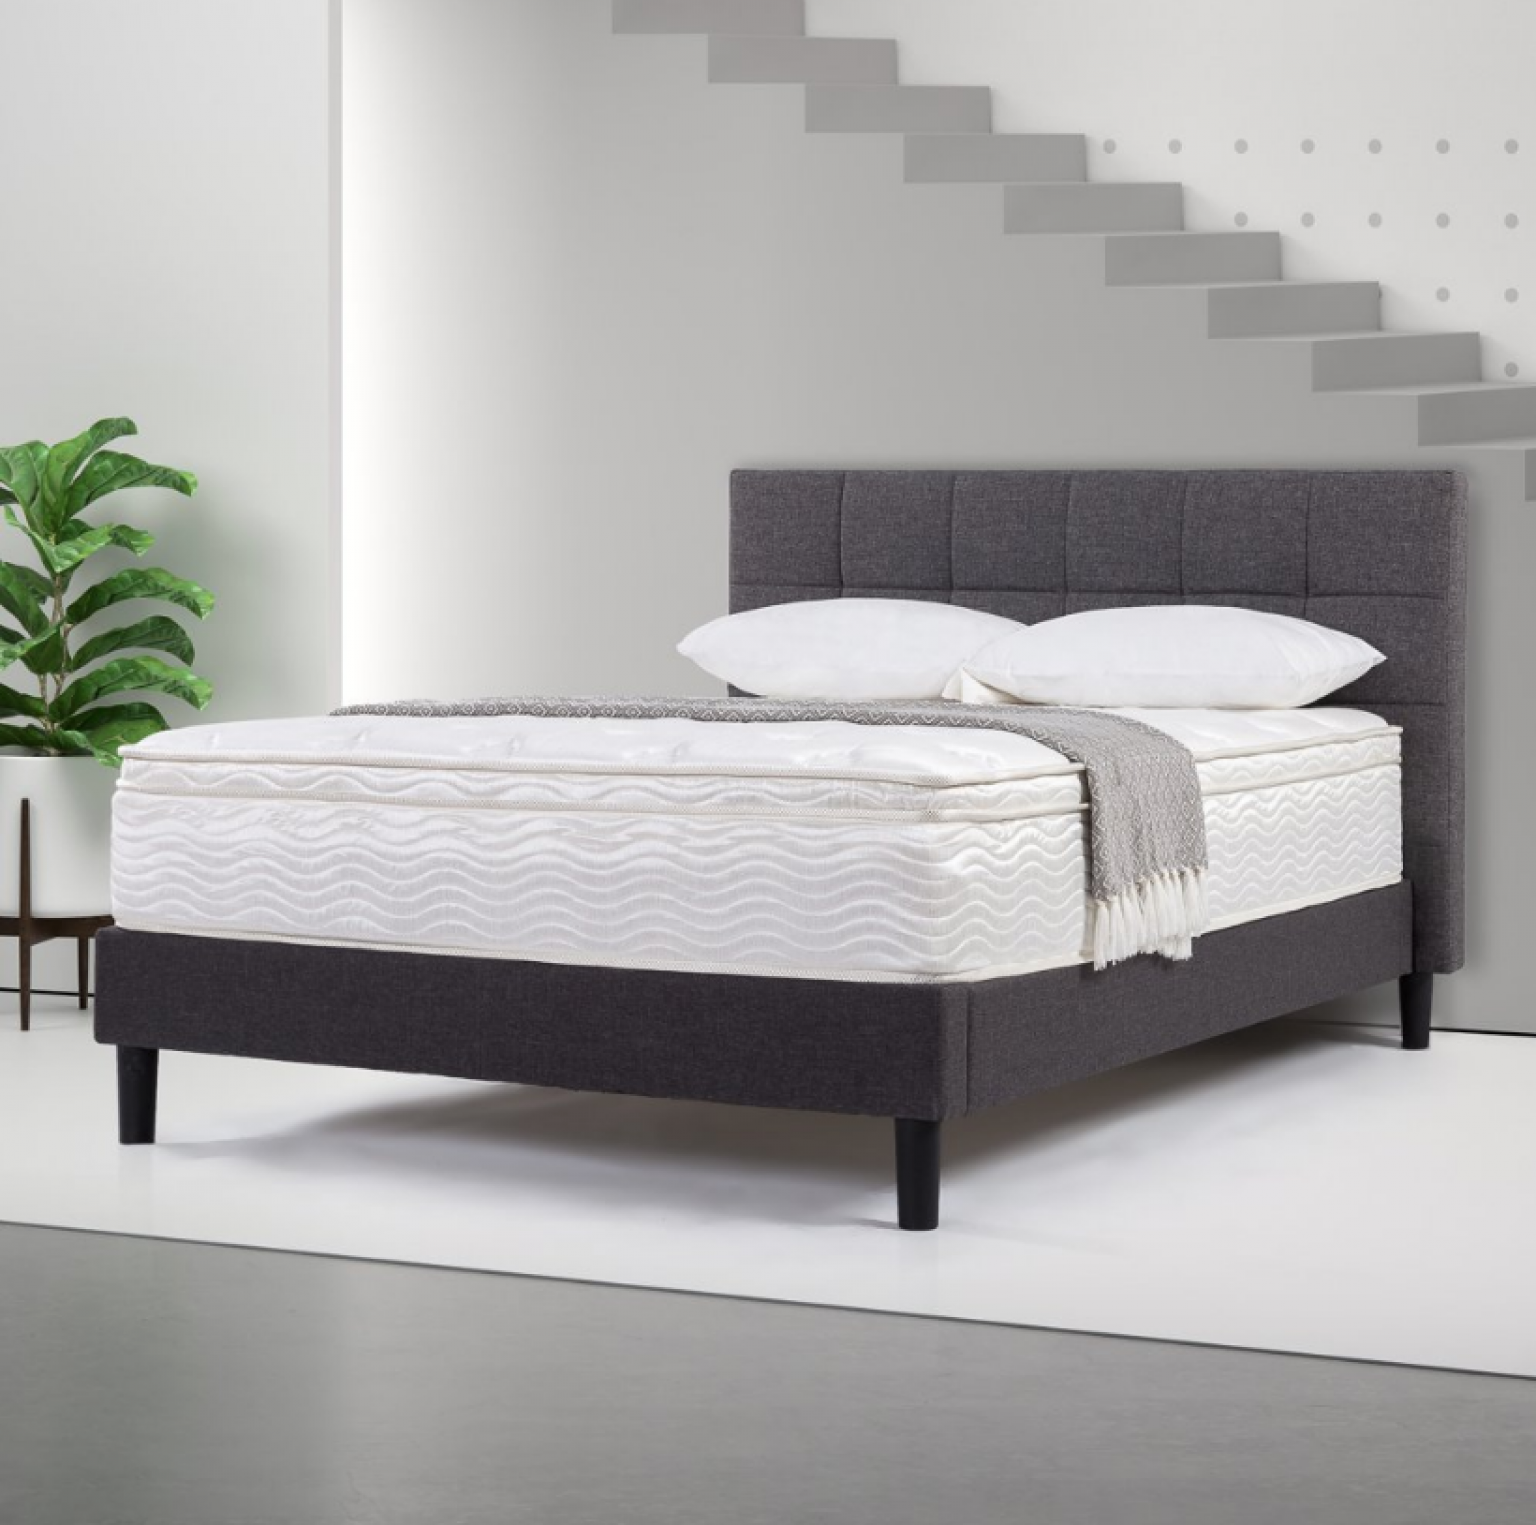 5 Best Firm KingSize Mattresses [2023 UPDATED] Thorough Buyer's Guide